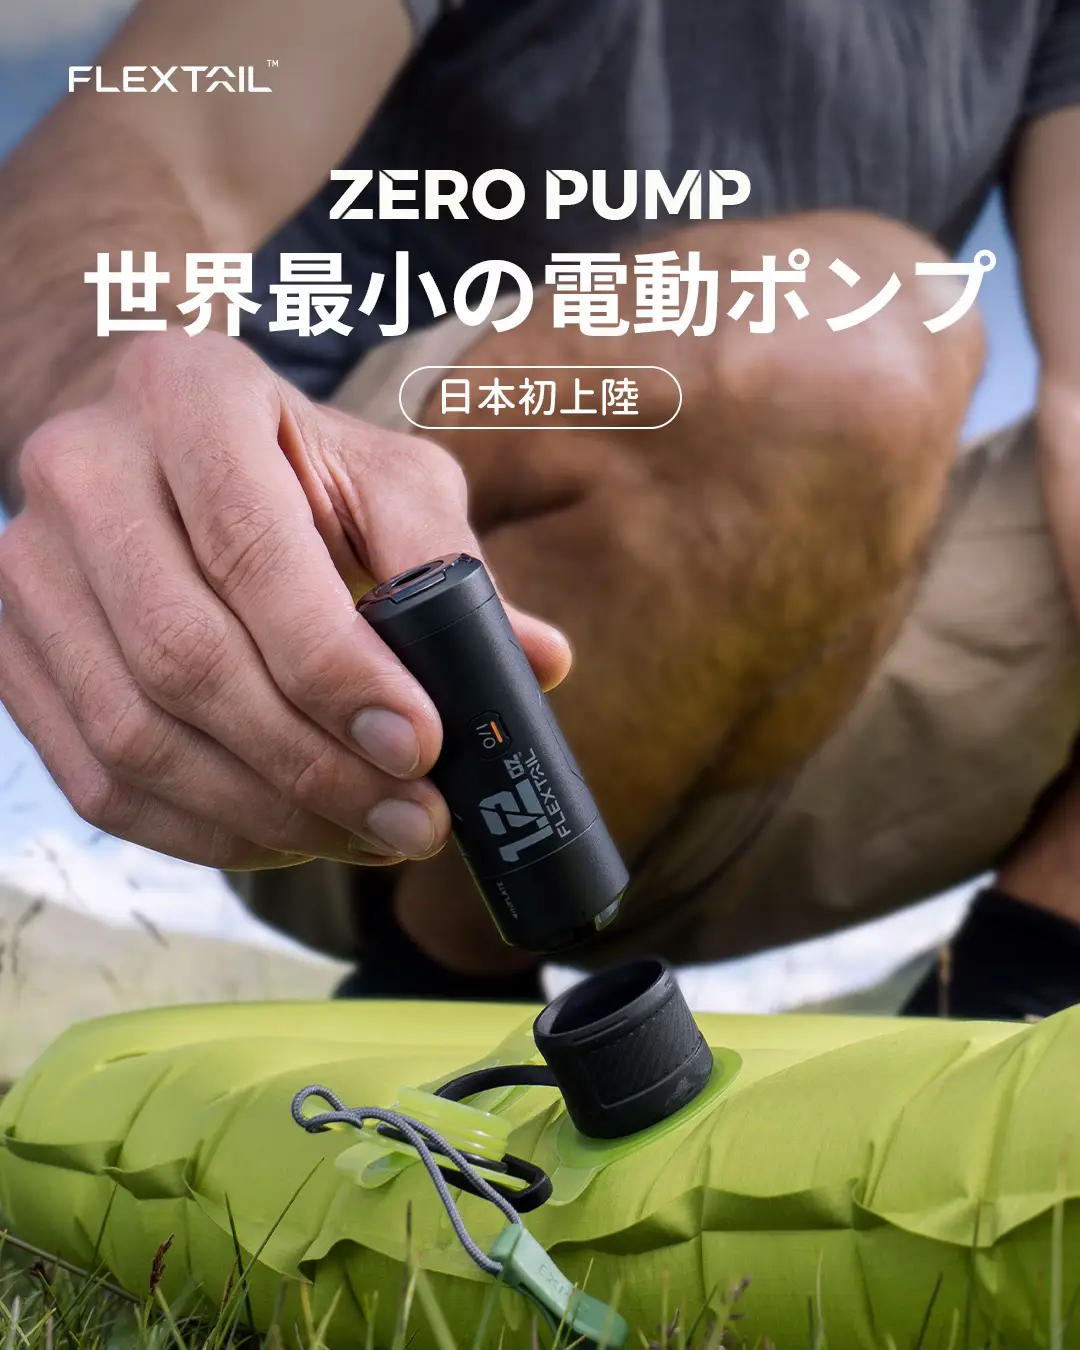 First landing in Japan] The world's smallest air mat specialized